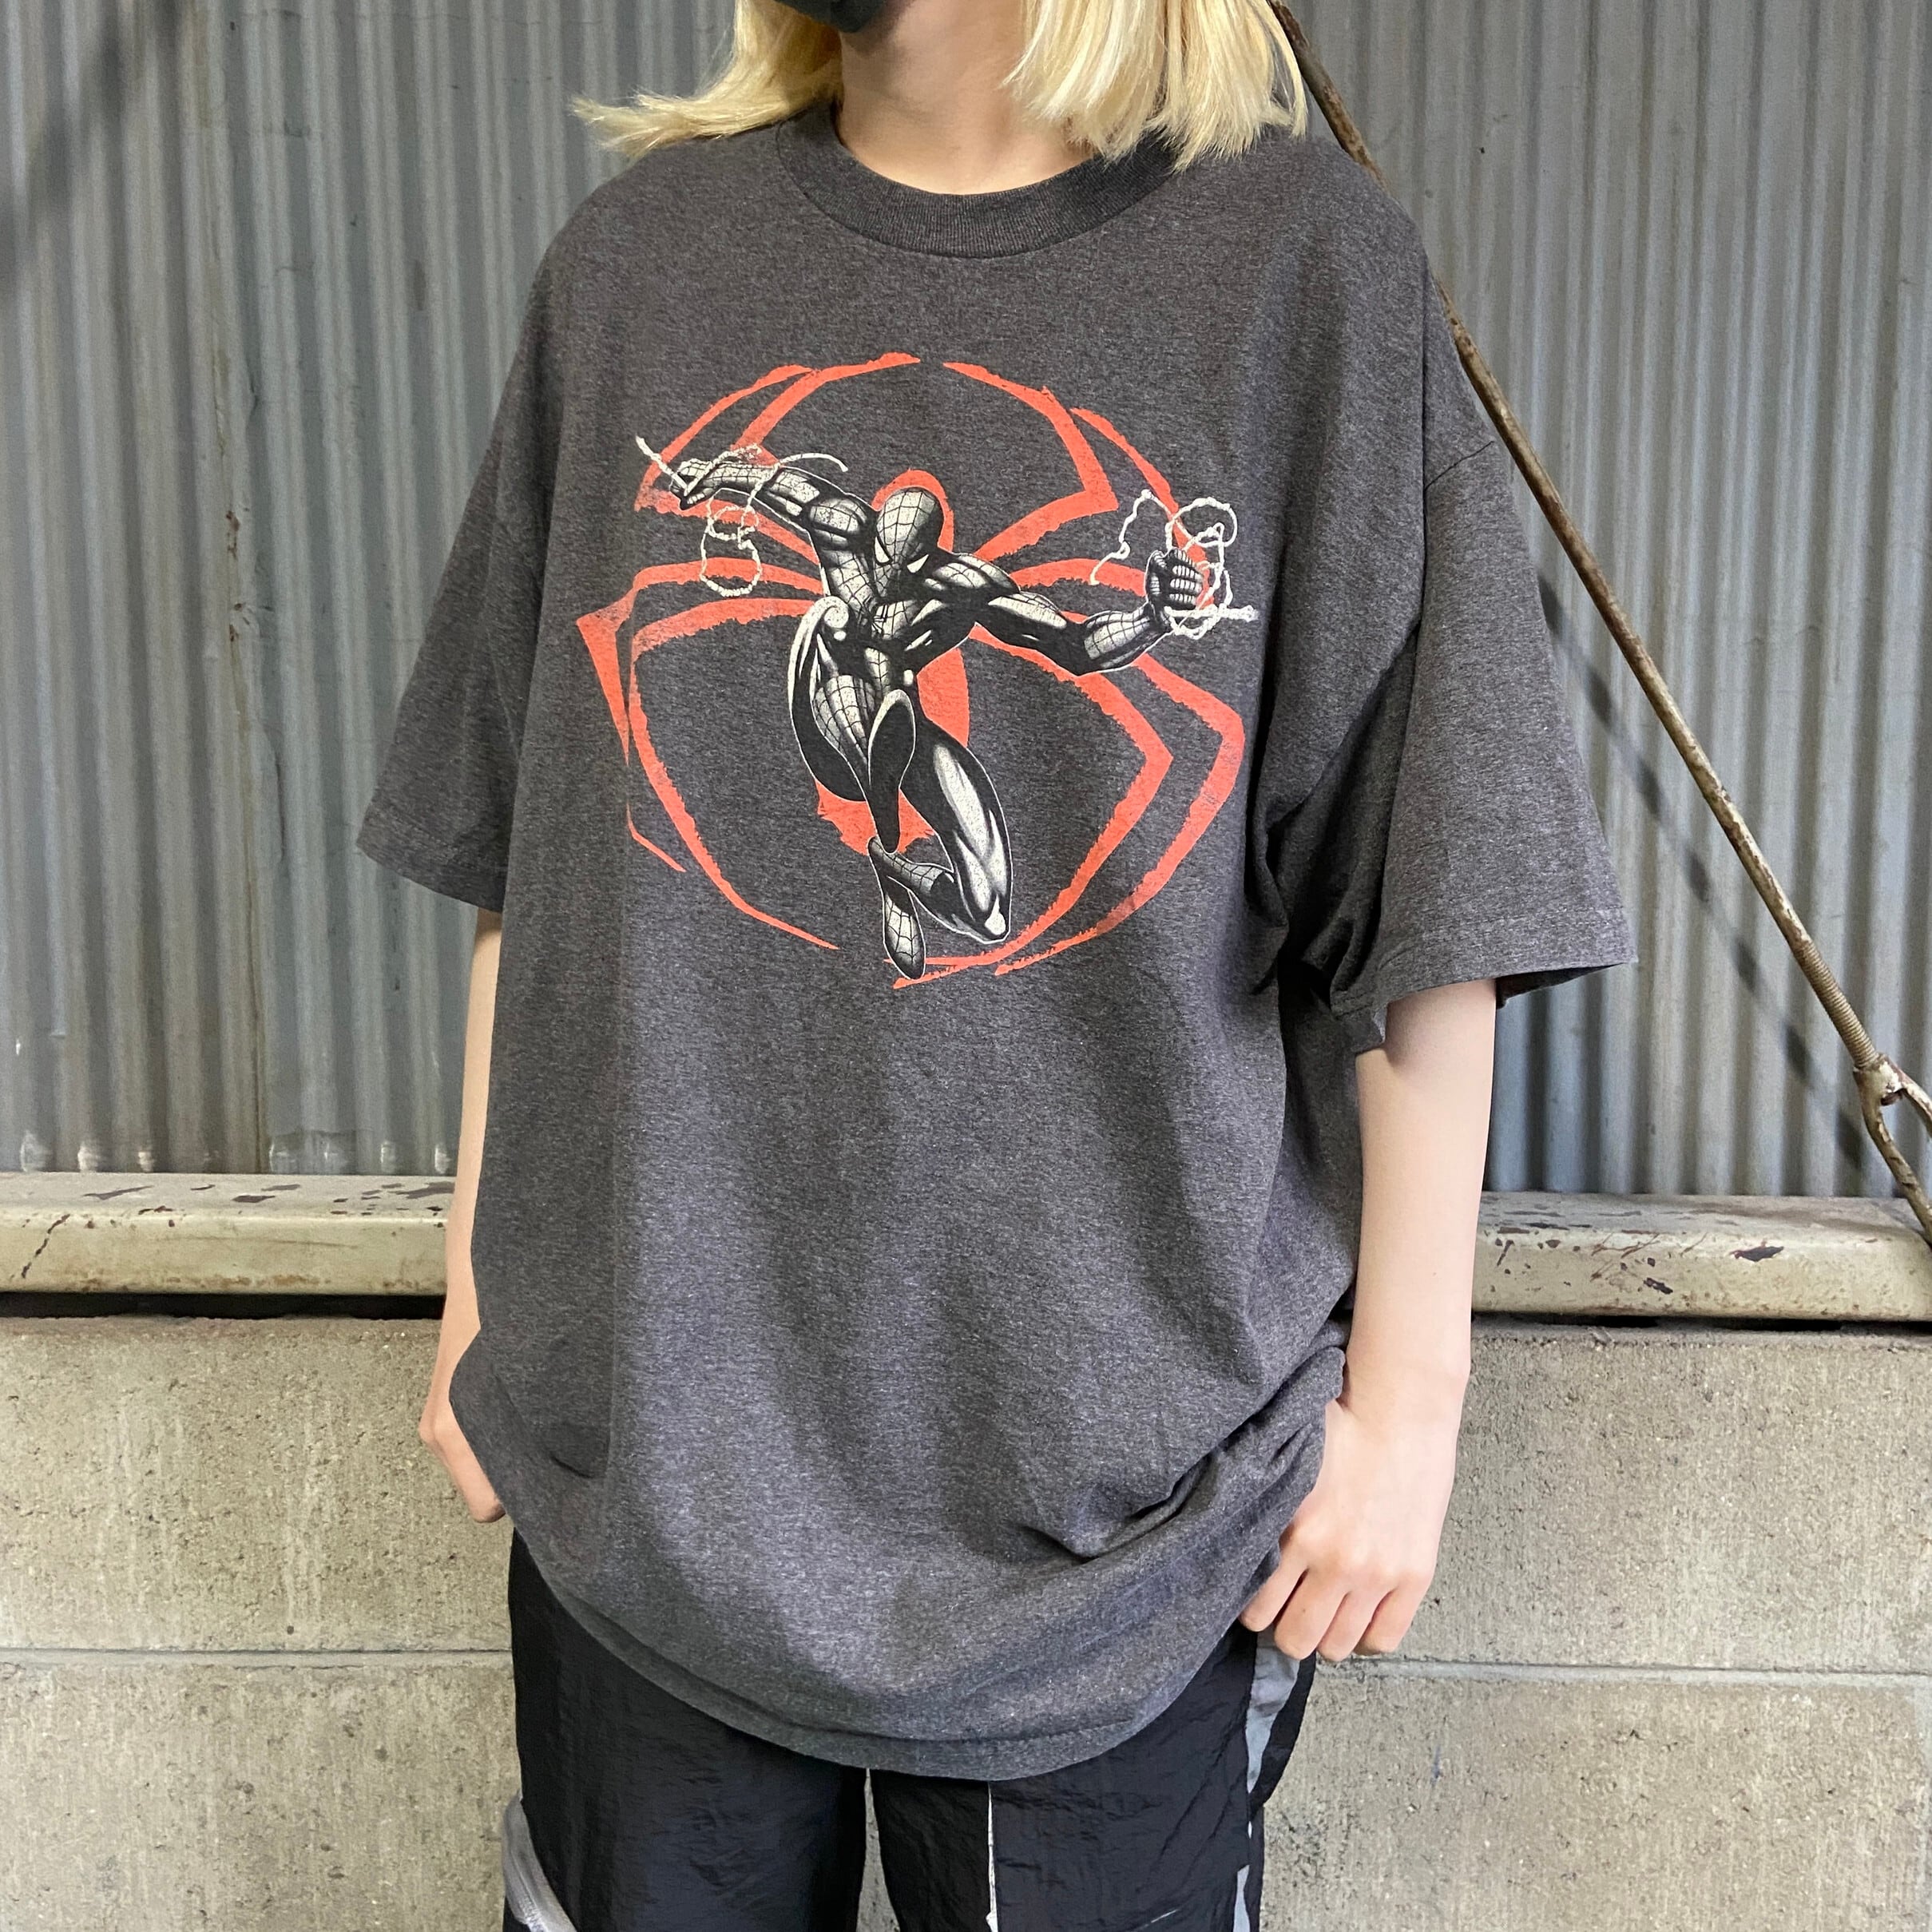 MARVEL SPIDER-MAN スパイダーマン キャラクタープリントTシャツ メンズXL 古着 マーベル 映画 ヒーロー ムービー コミック  アメコミ グレー【Tシャツ】【AN20】 | cave 古着屋【公式】古着通販サイト powered by BASE